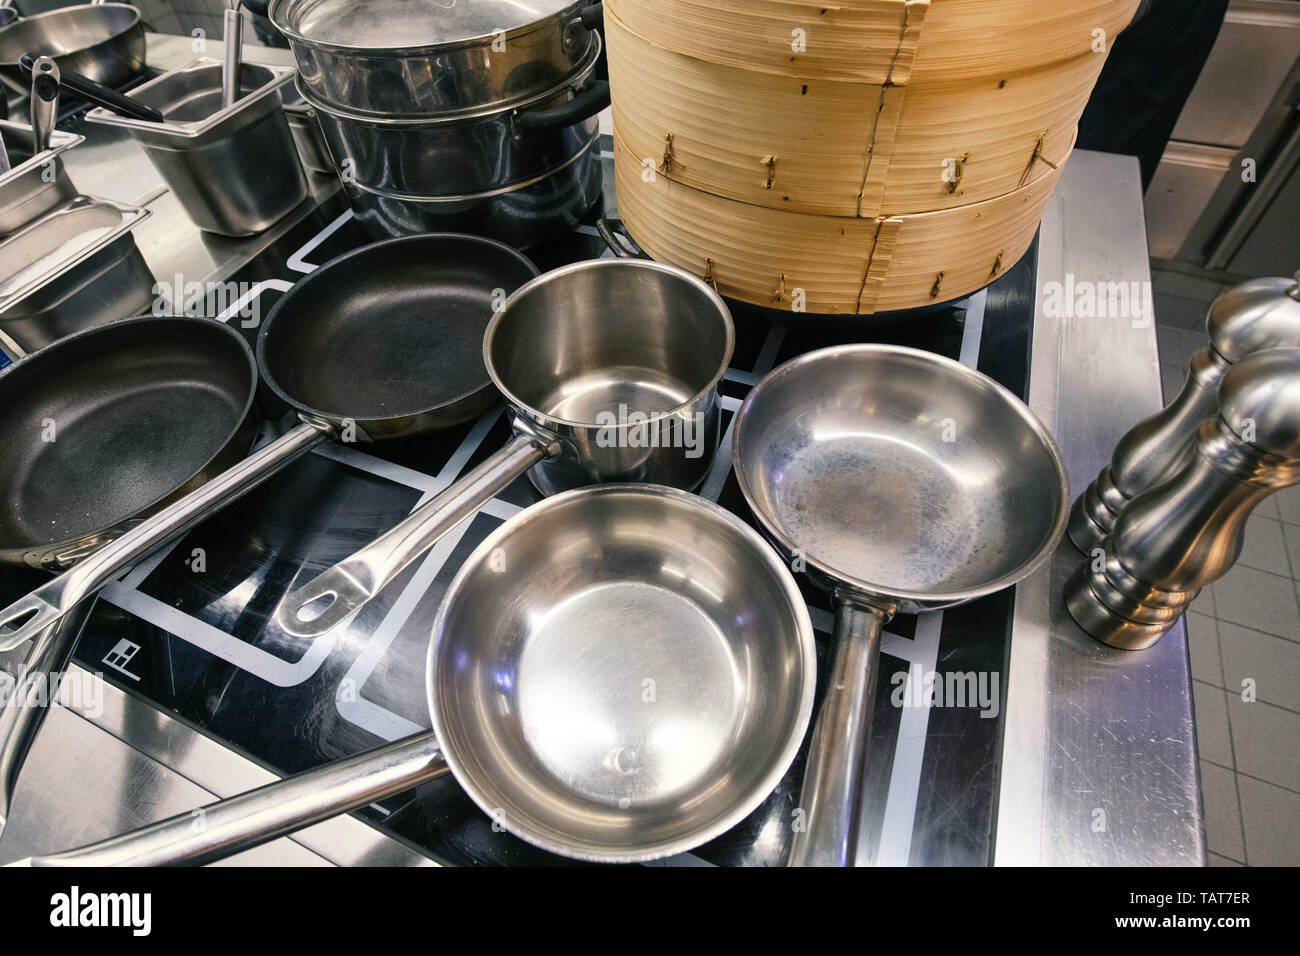 Pots, pans and dim sum baskets waiting in a kitchen to be used. Stock Photo